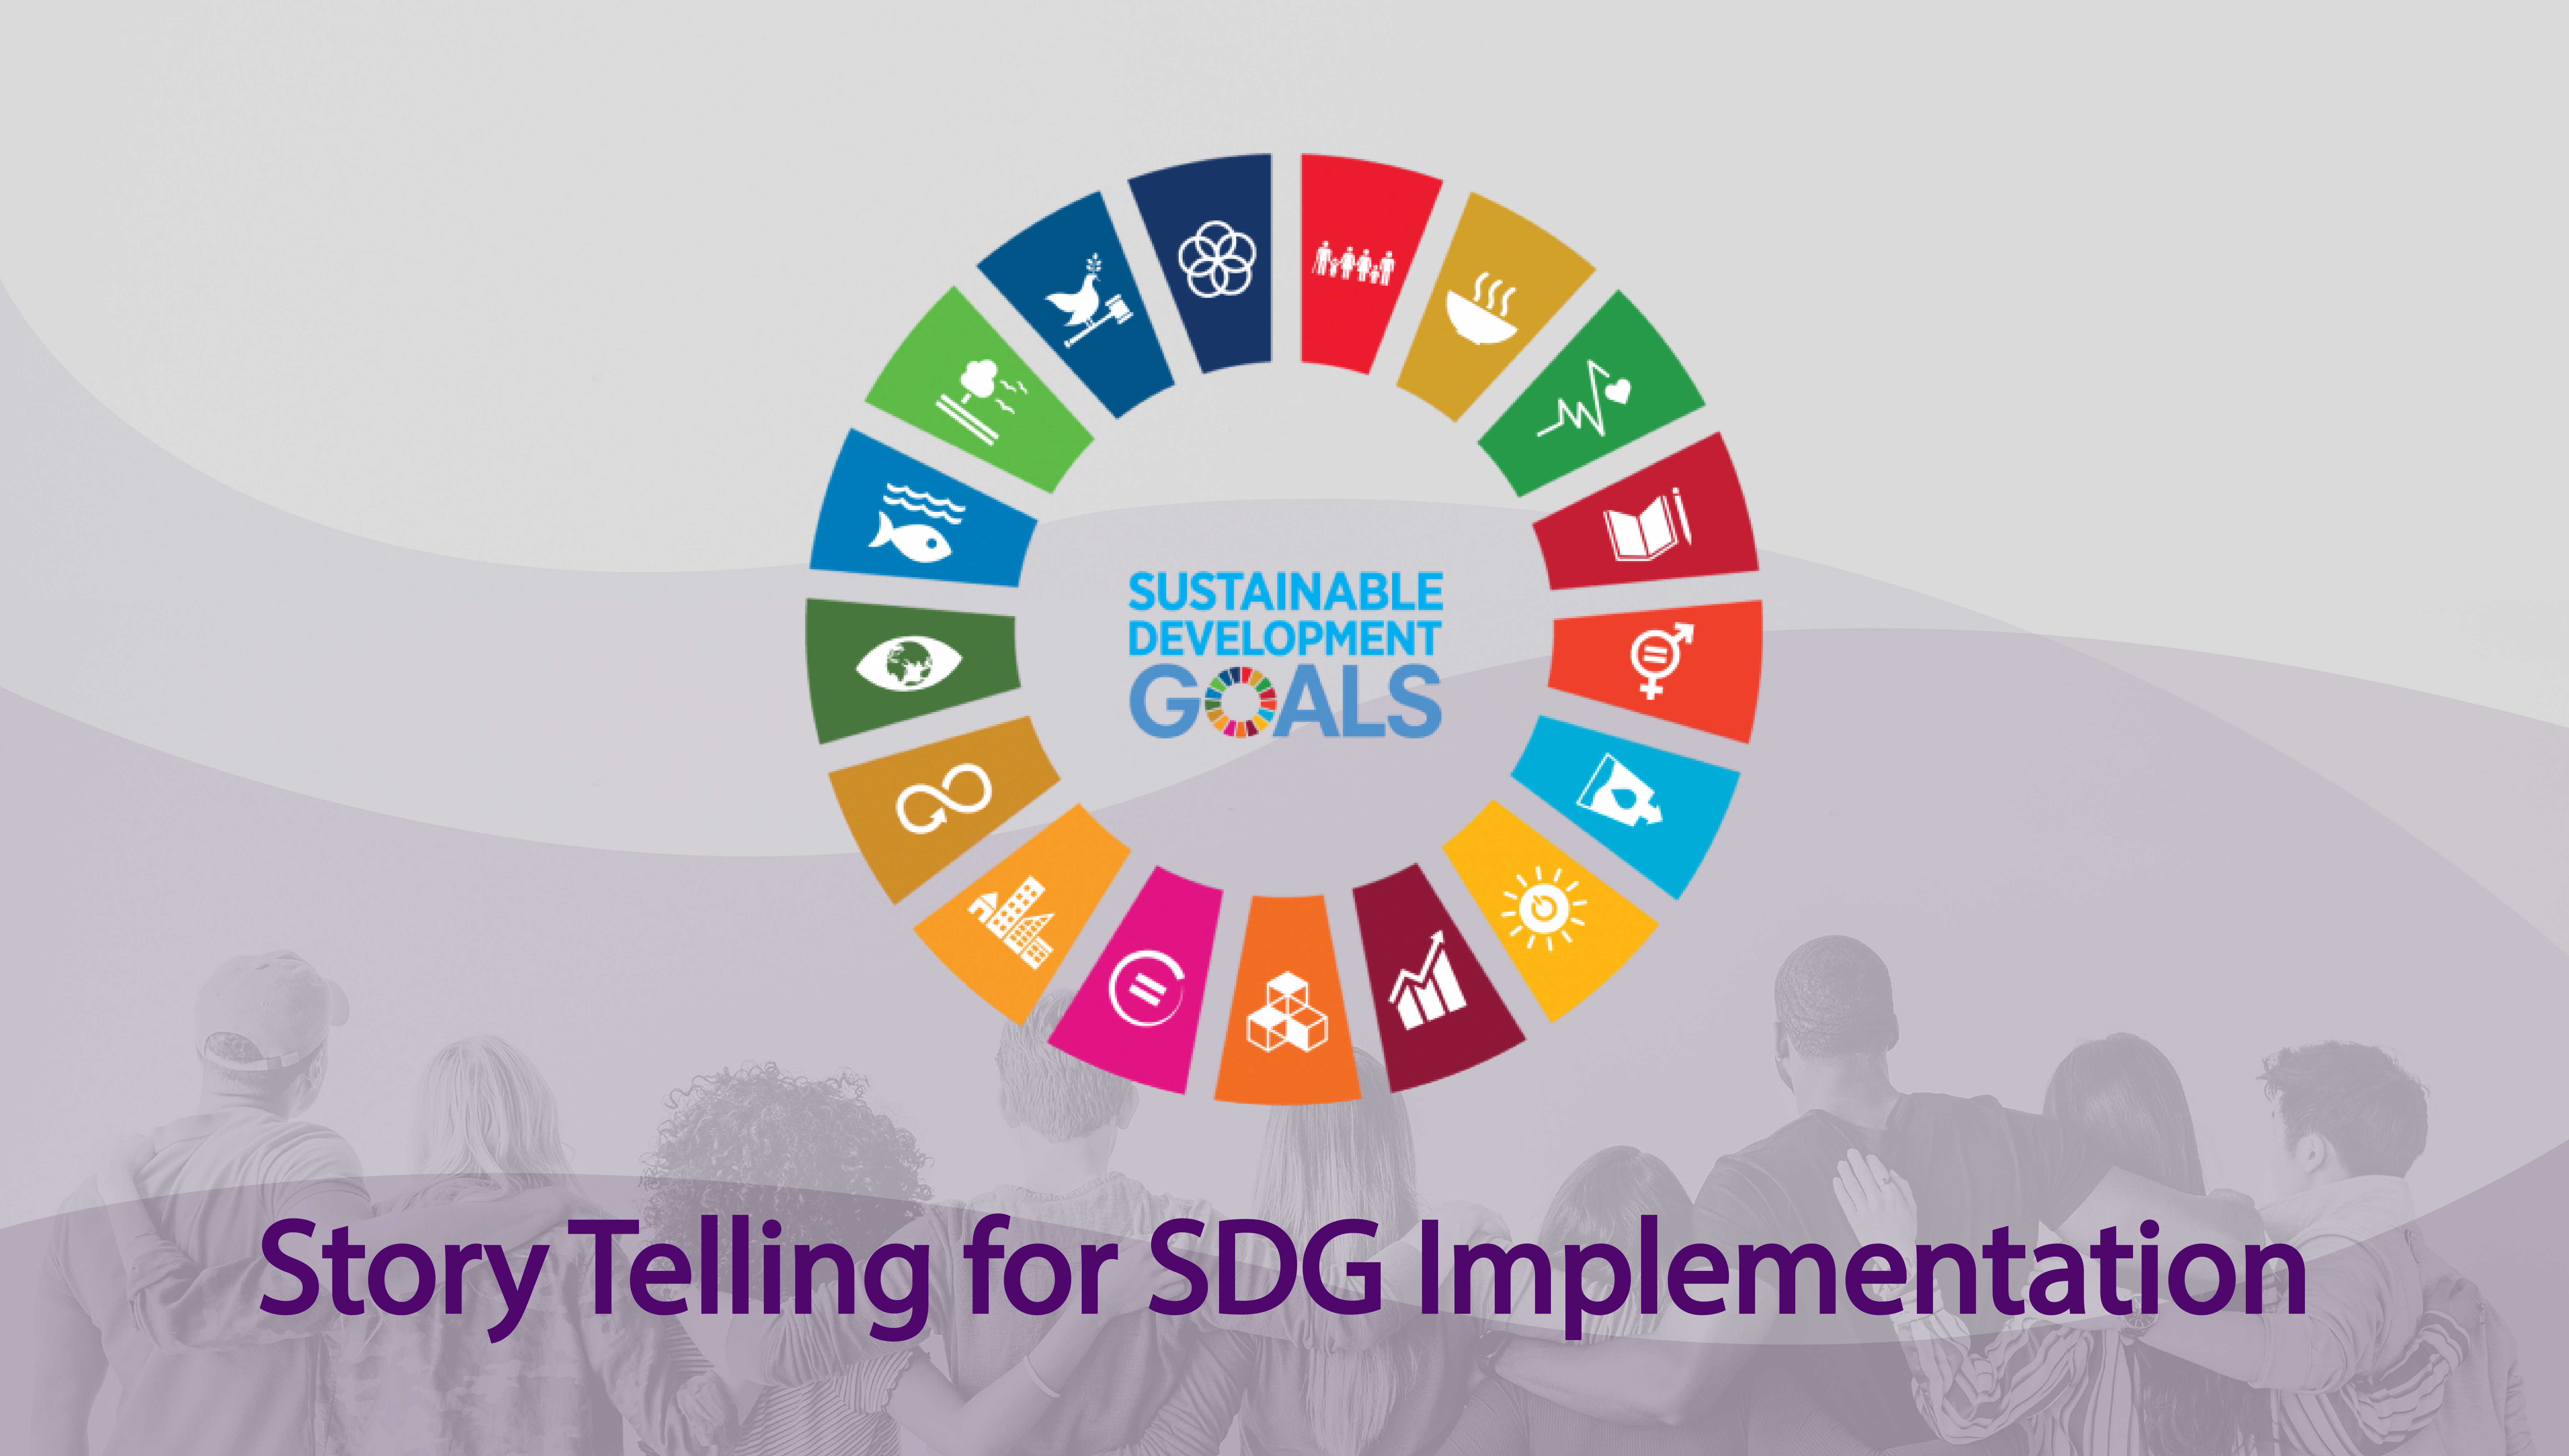 [Story Telling for SDG Implementation] Hayoung Jeon (MDP 2016)